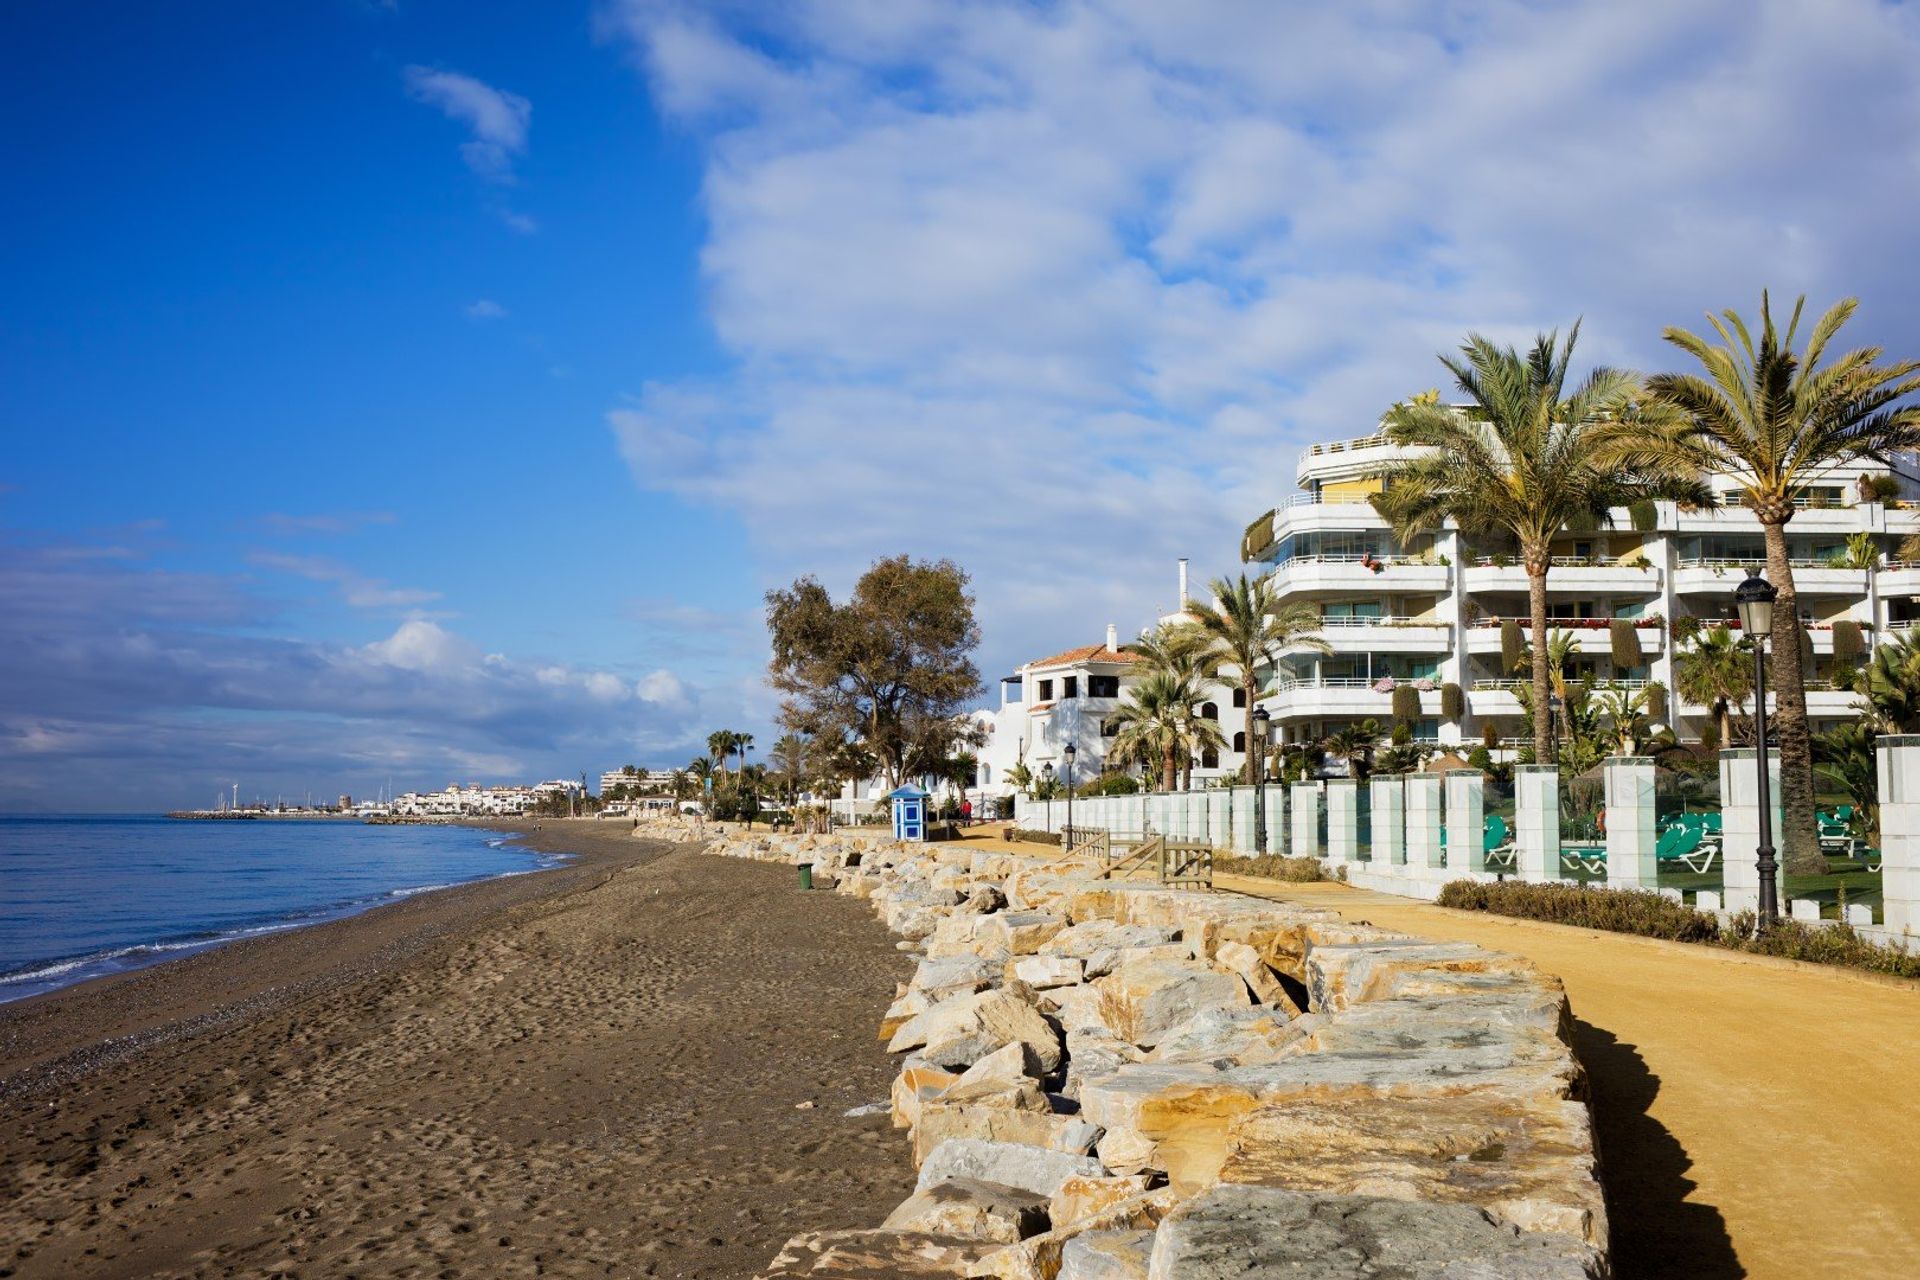 Have a relaxing stroll down the palm-lined promenade while enjoying views of the sparkling Mediterranean